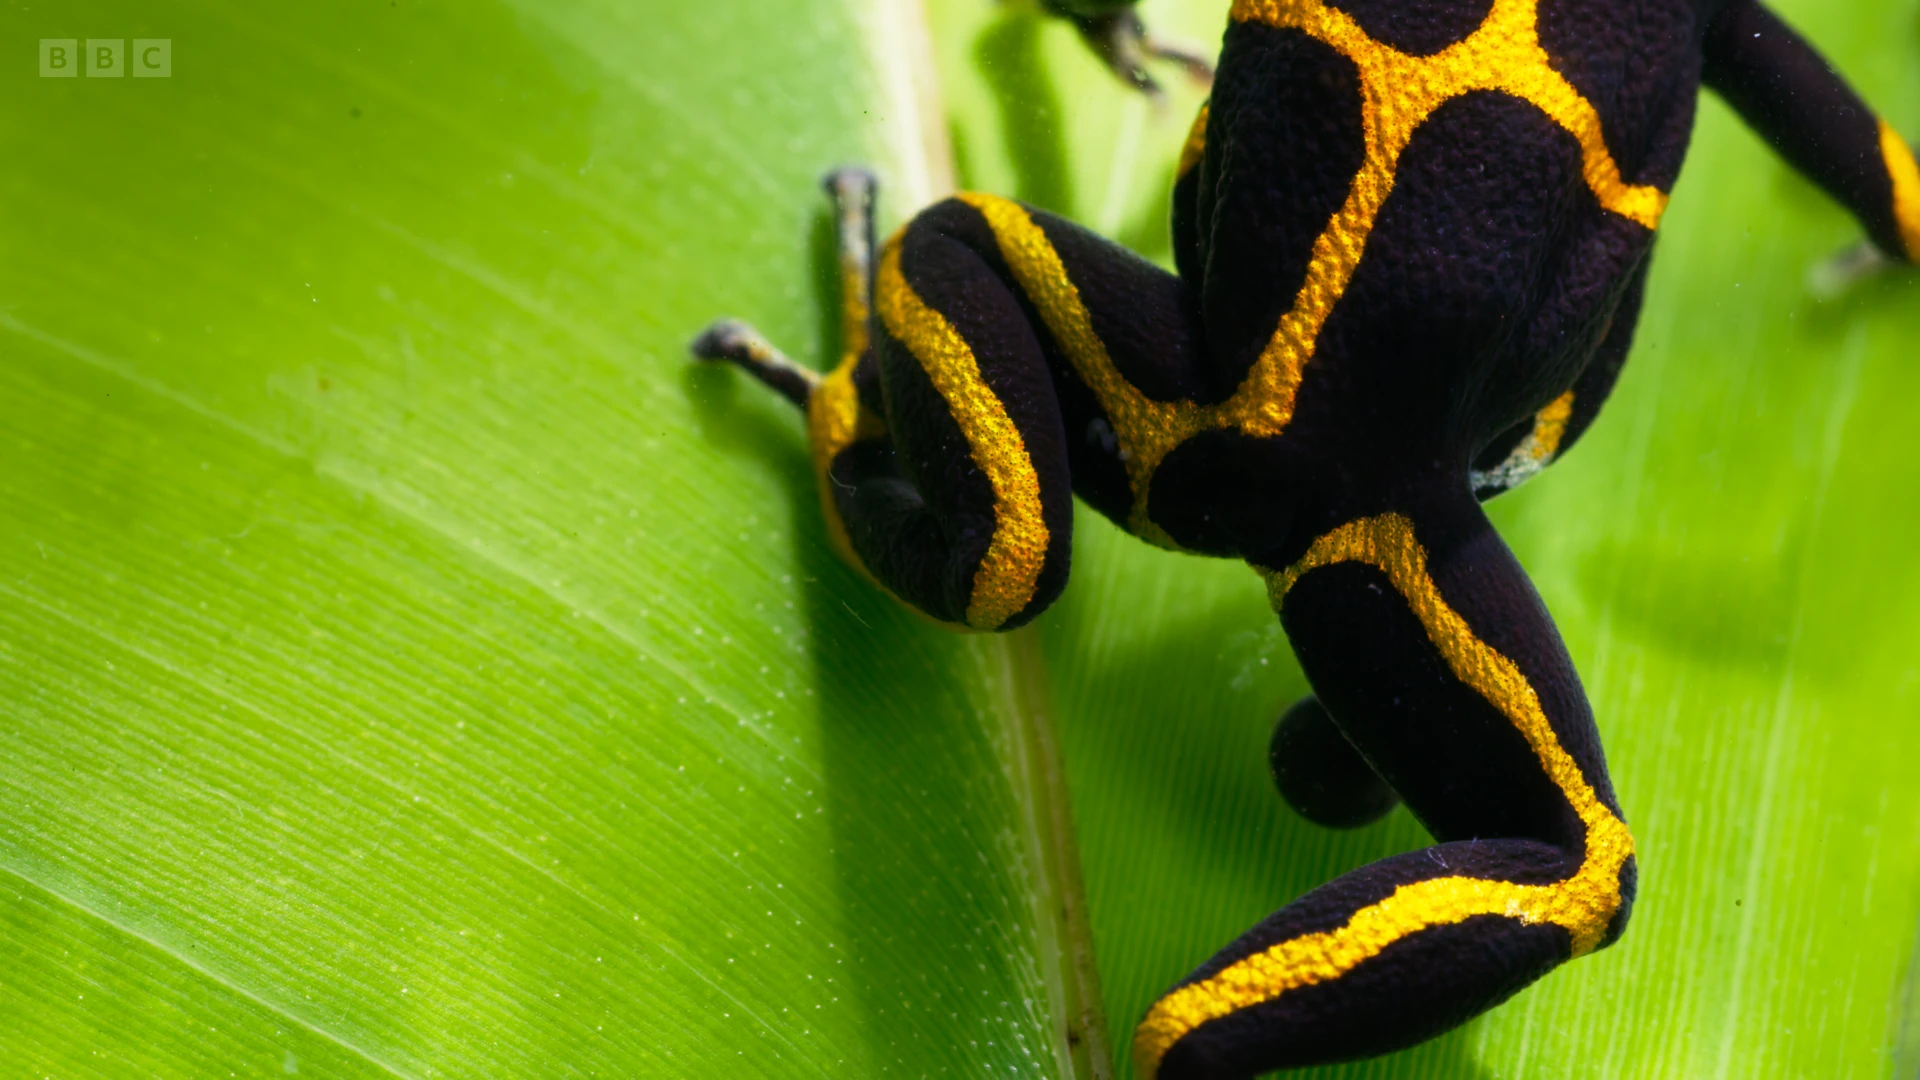 Mimic poison frog (Ranitomeya imitator) as shown in Seven Worlds, One Planet - South America